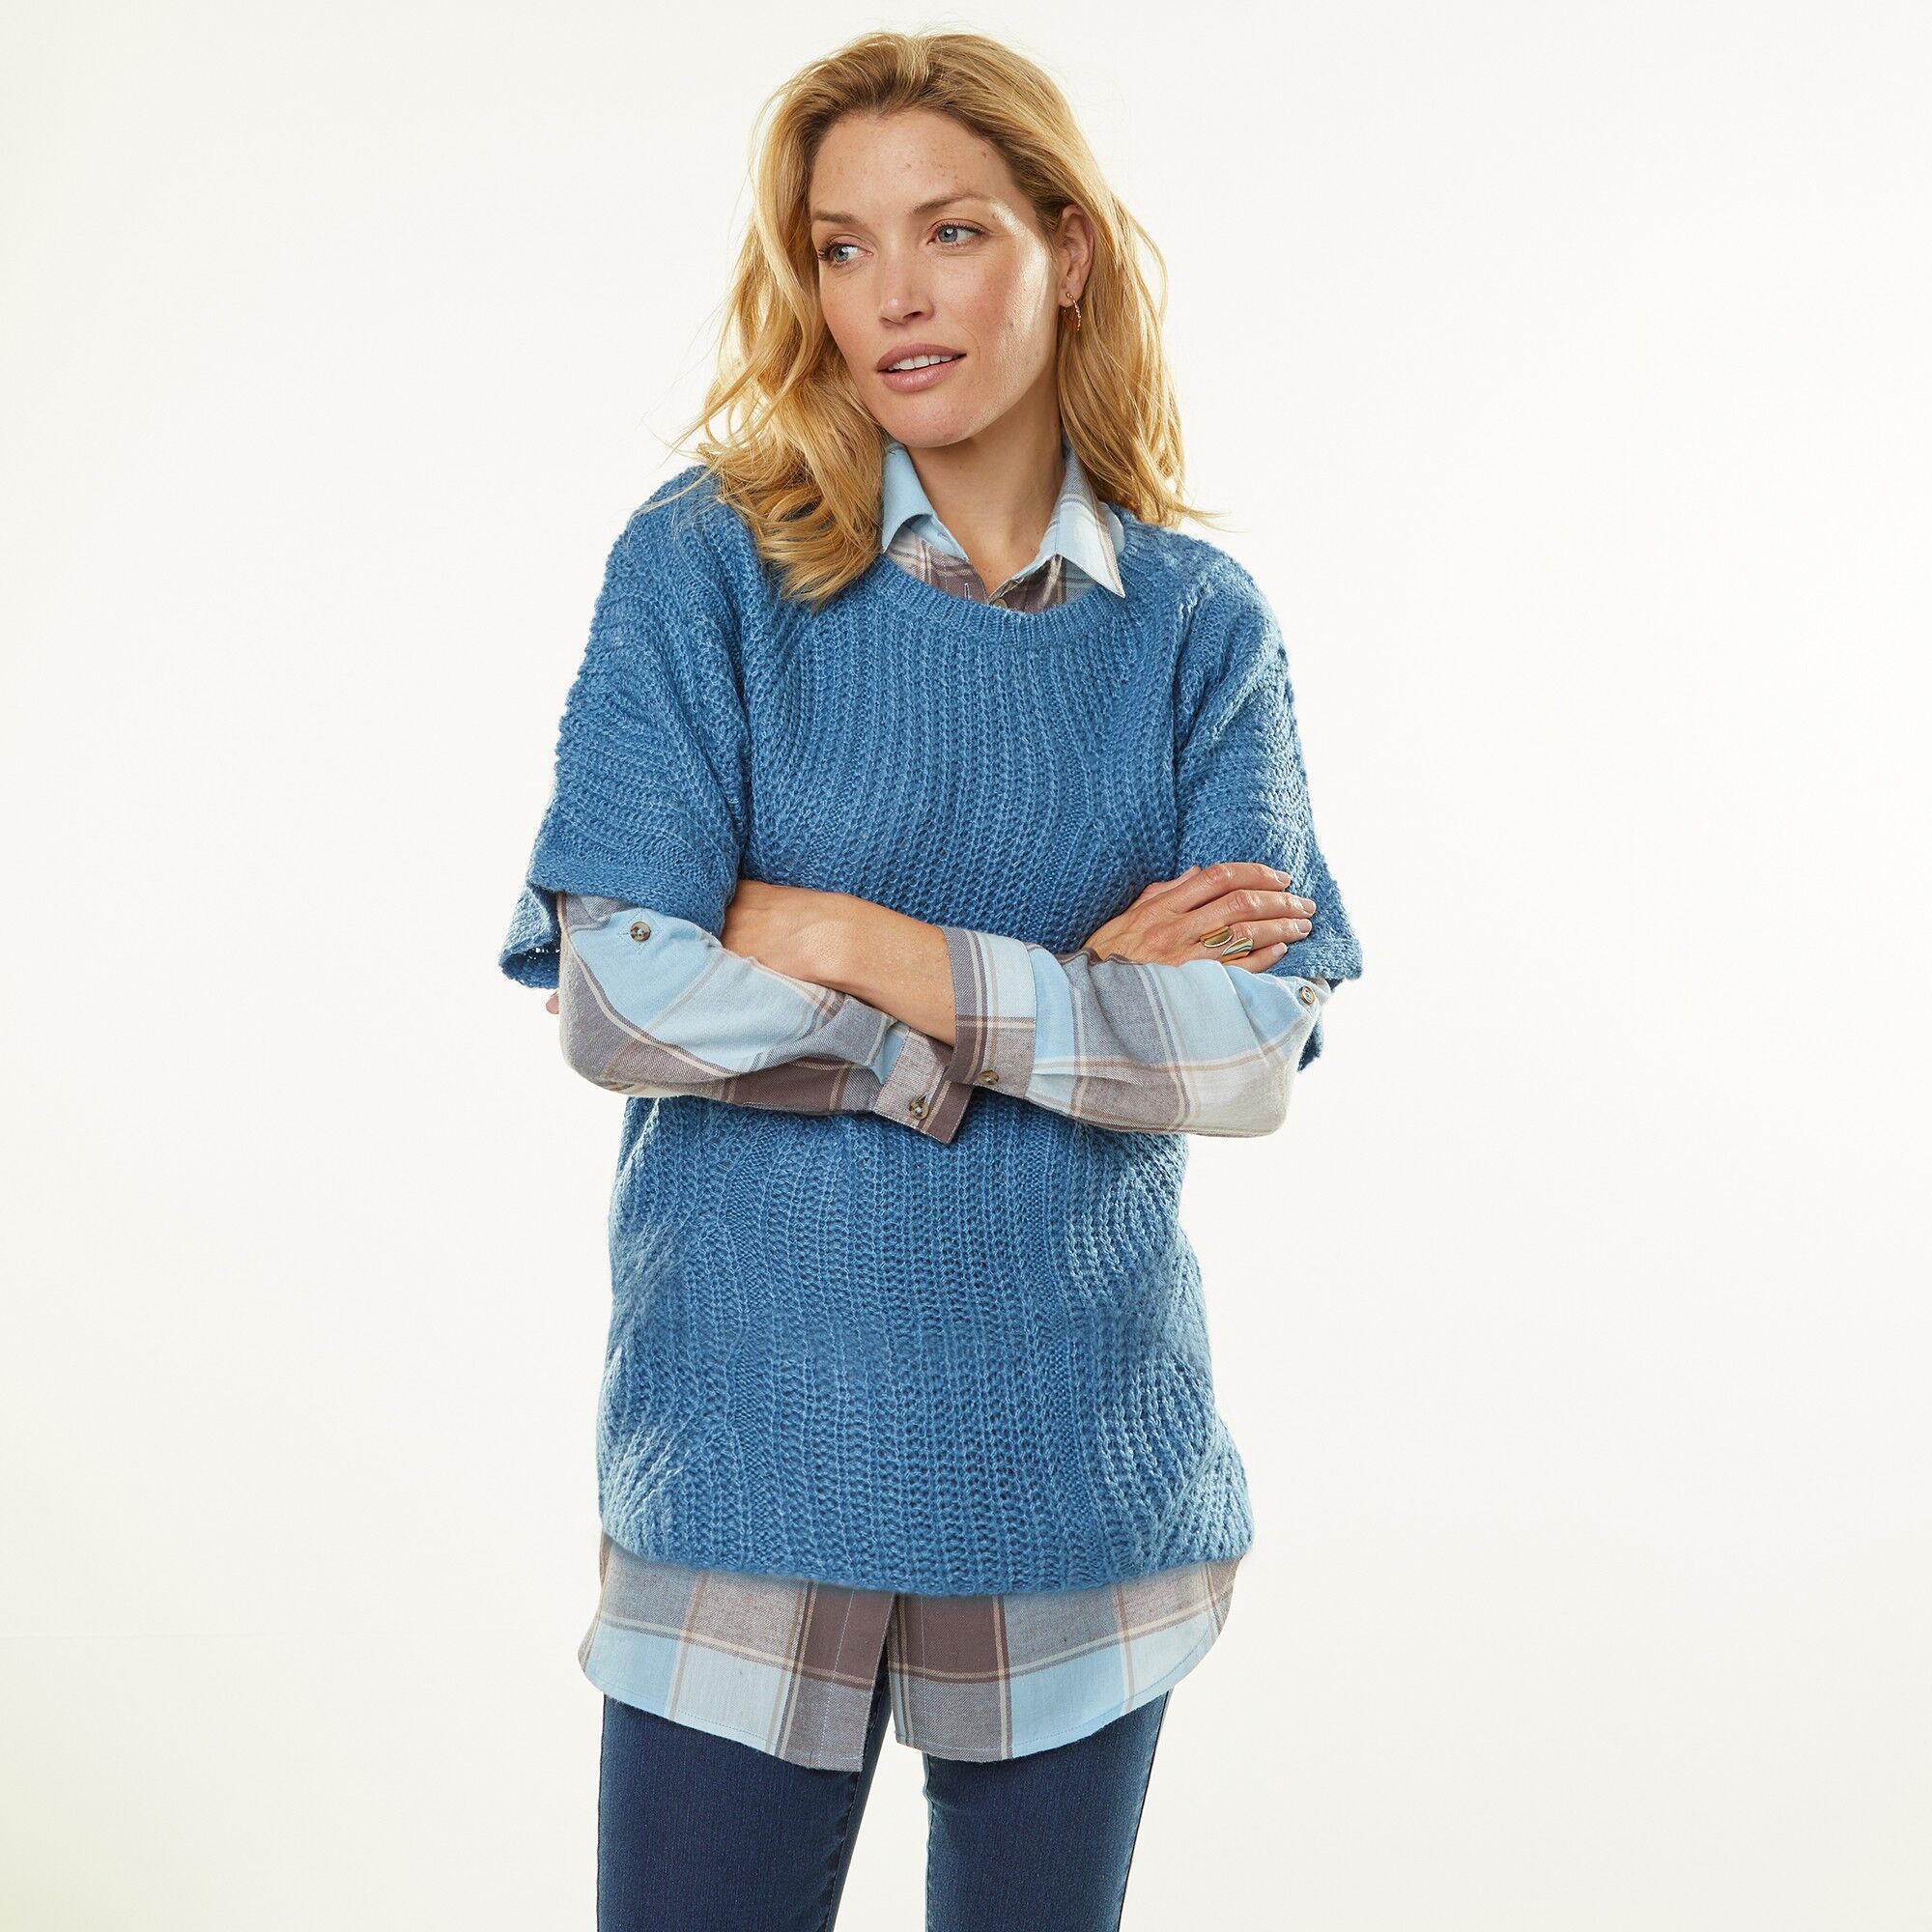 Blancheporte Pull Poncho Manches Coudes - Femme Bleu 38/40